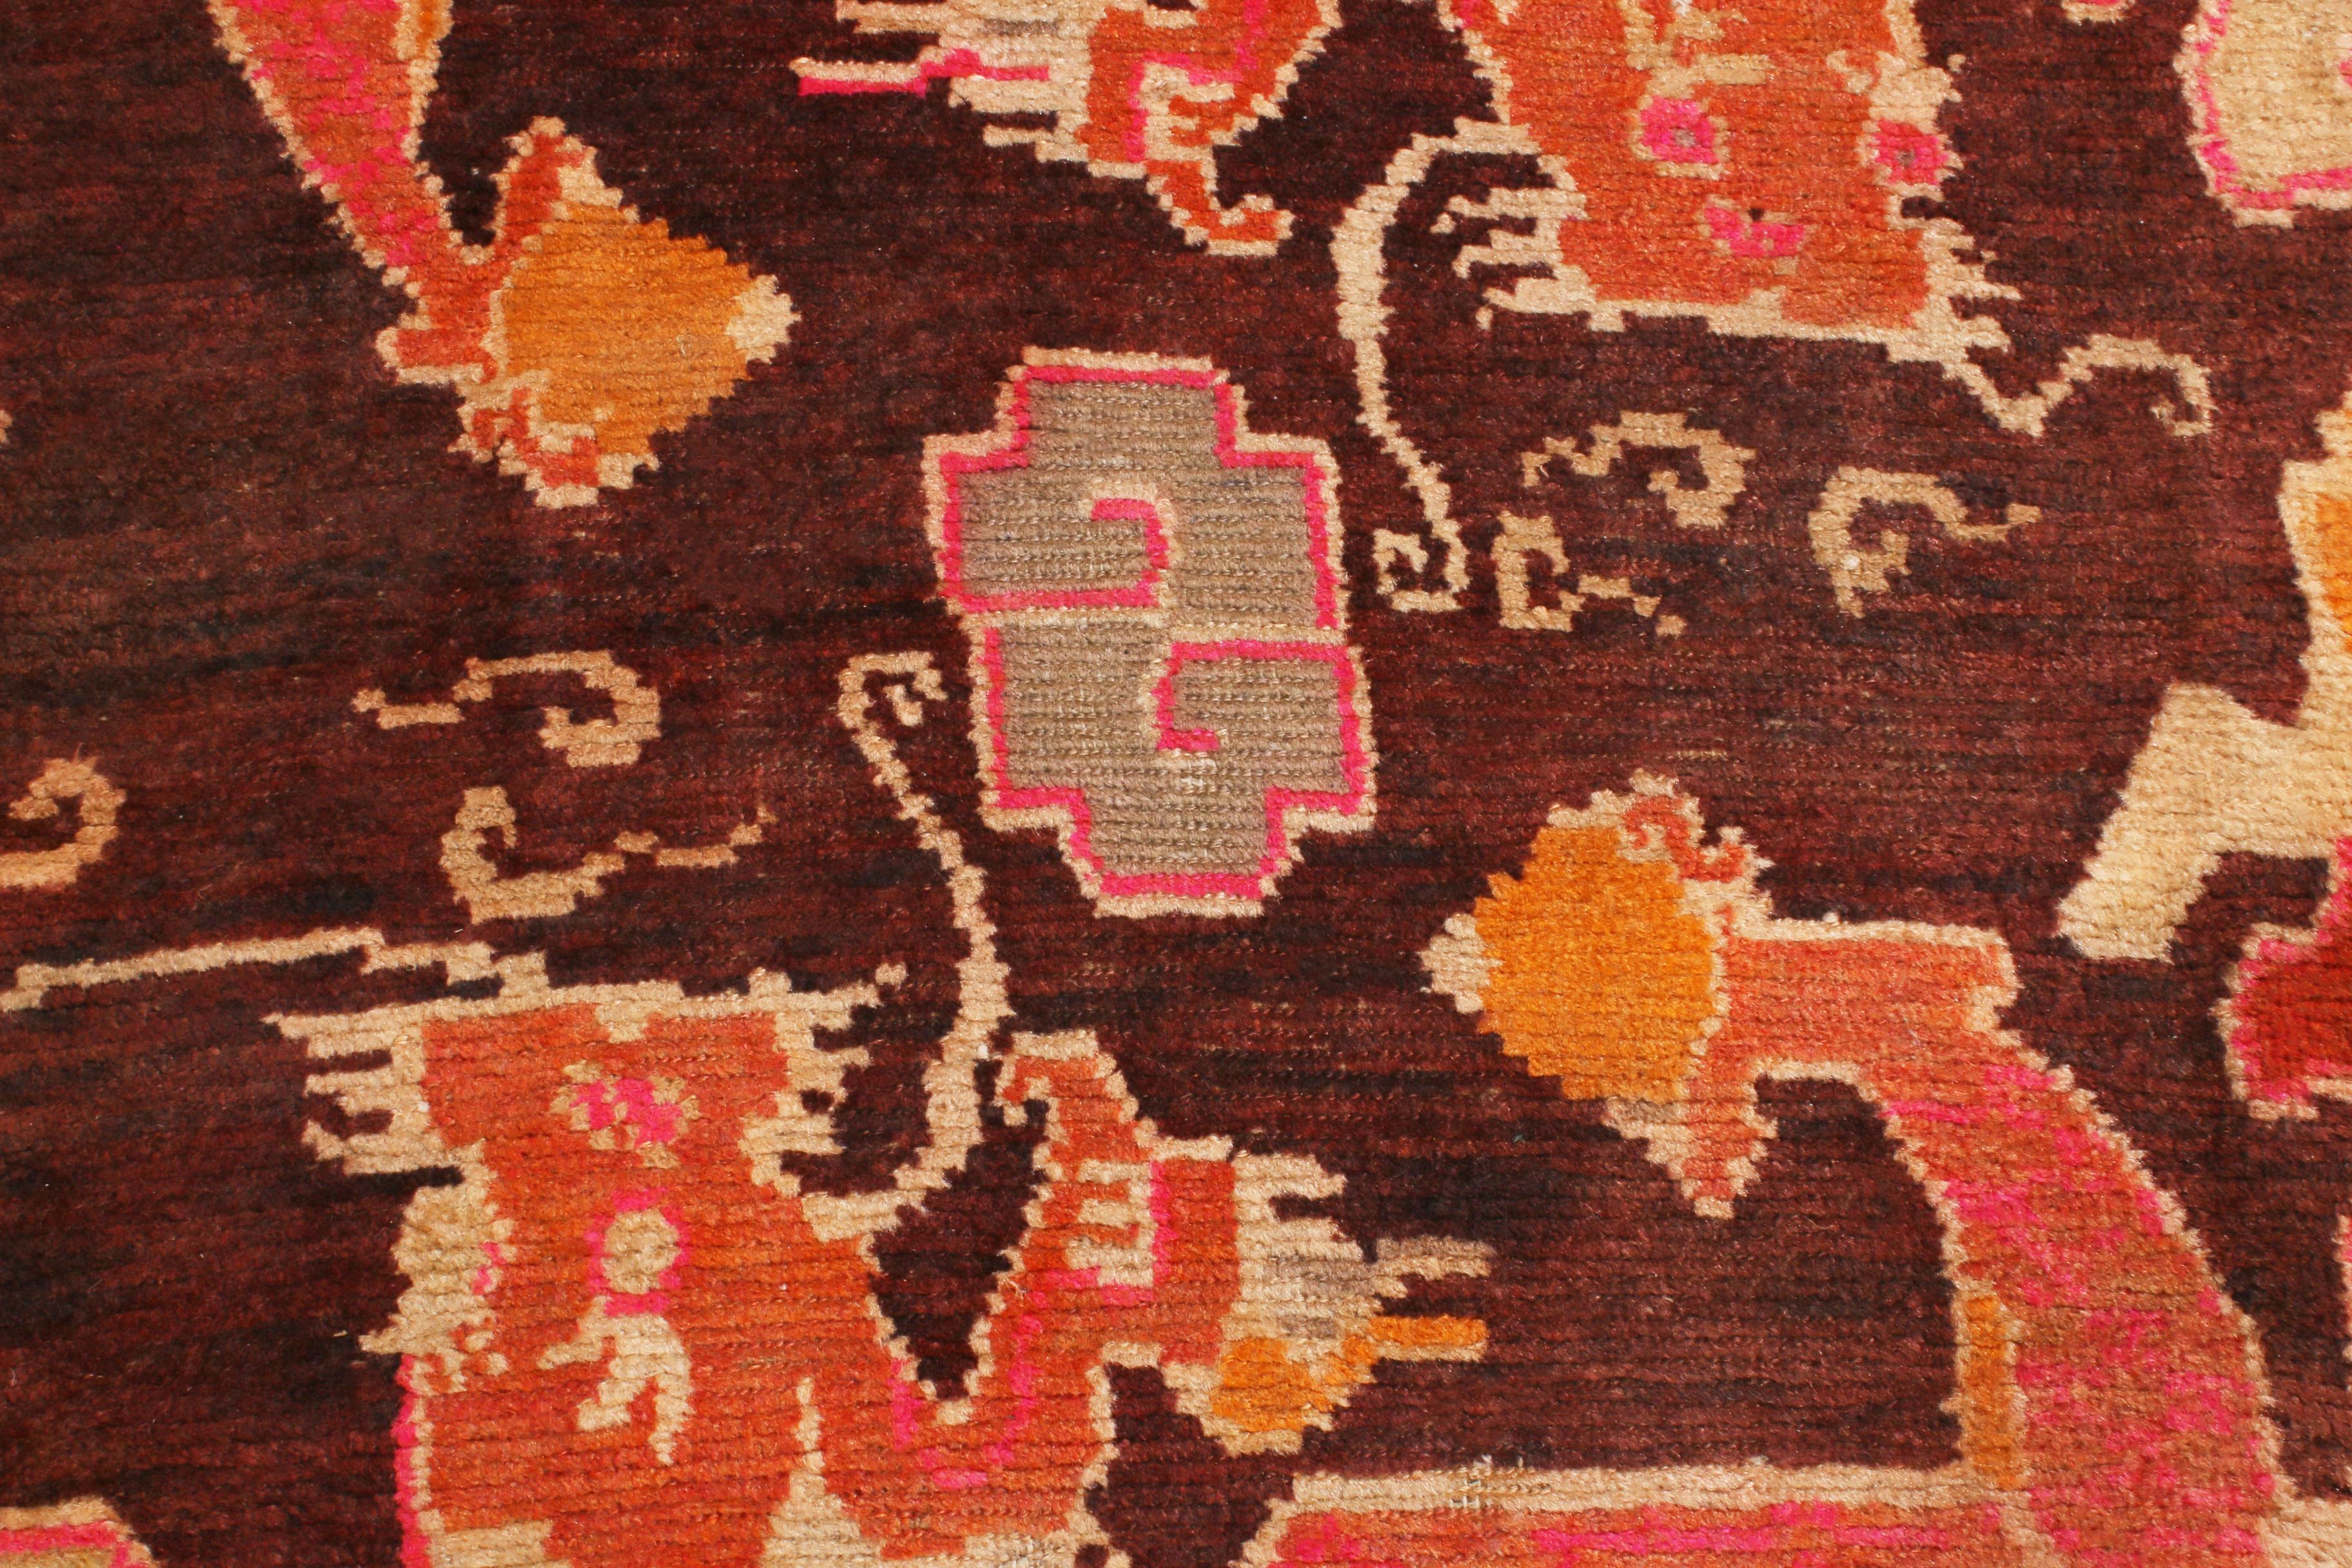 Hand-Knotted Antique Tibetan Orange and Brown Wool Rug with Dragon and Cloud Motifs